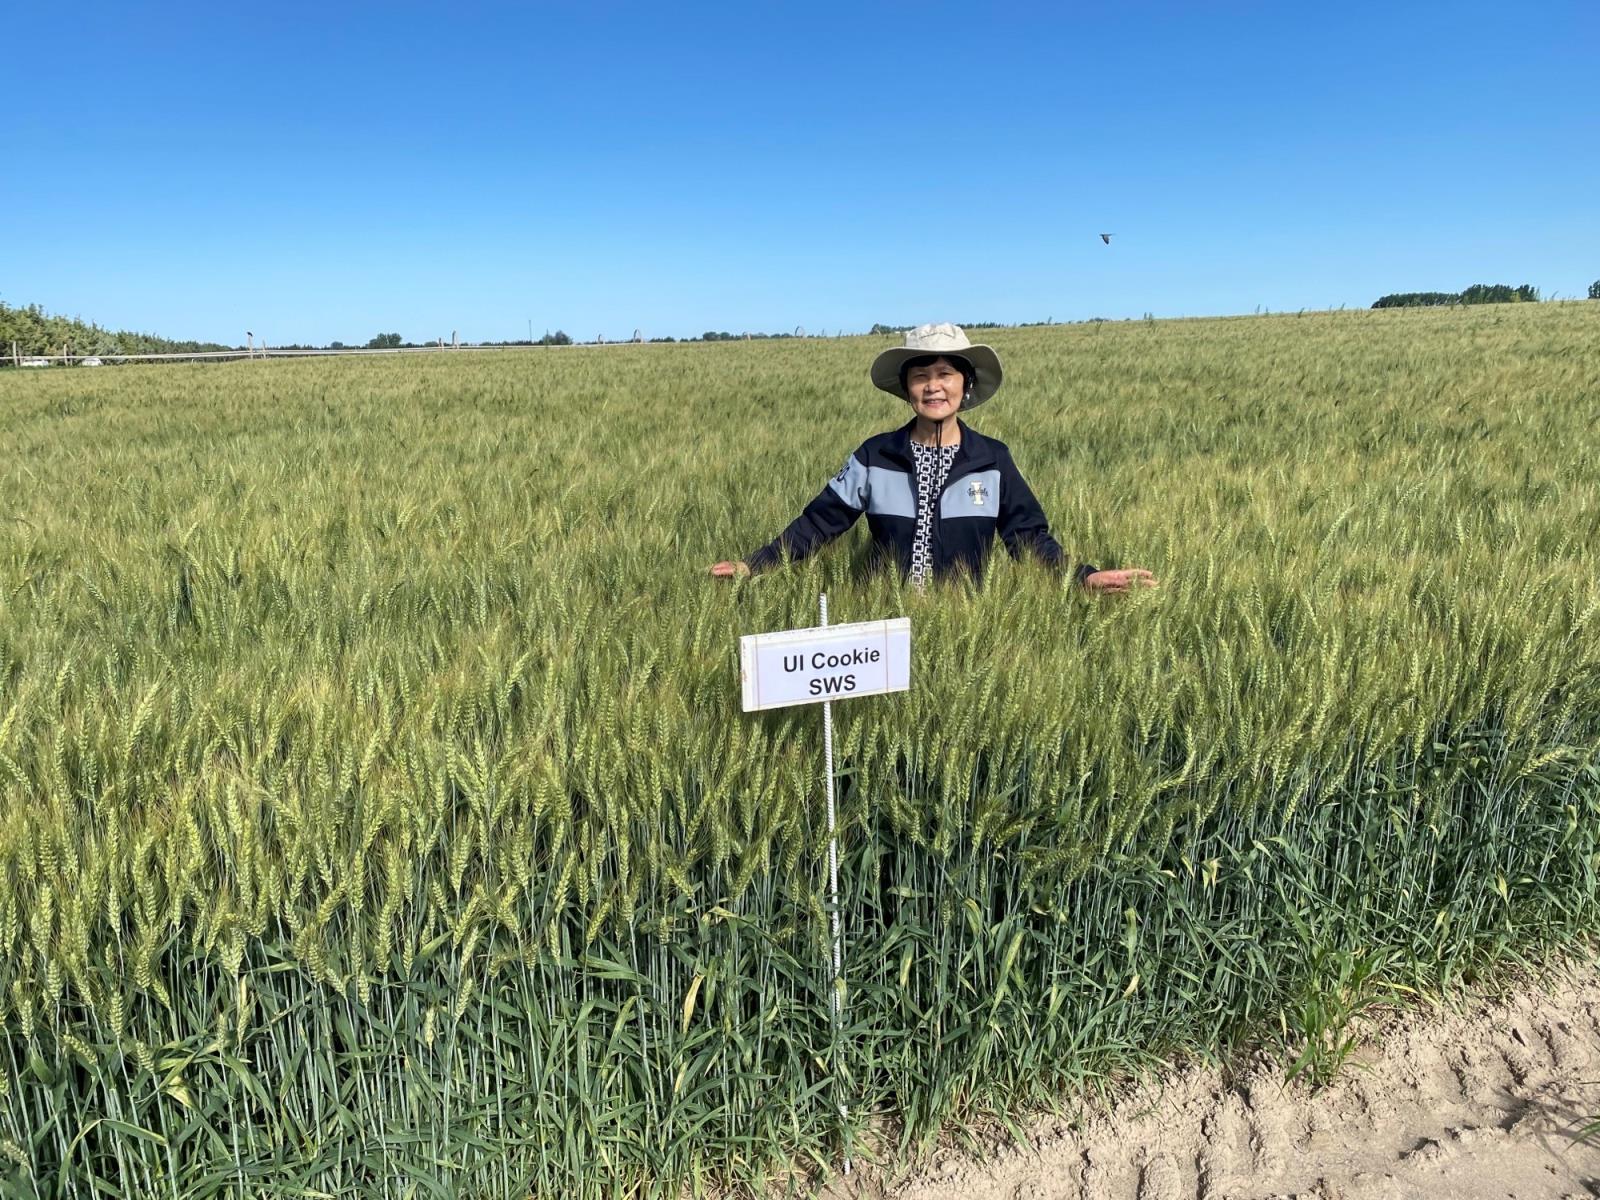 University of Idaho researcher Jianli Chen stands in a field planted to UI Cookie, a new soft white spring wheat variety that has performed well in Idaho trials. Chen developed the new variety at the UI Research and Extension wheat breeding center in Aberdeen with financial support from the Idaho Wheat Commission, which will manage the commercial release of UI Cookie. 